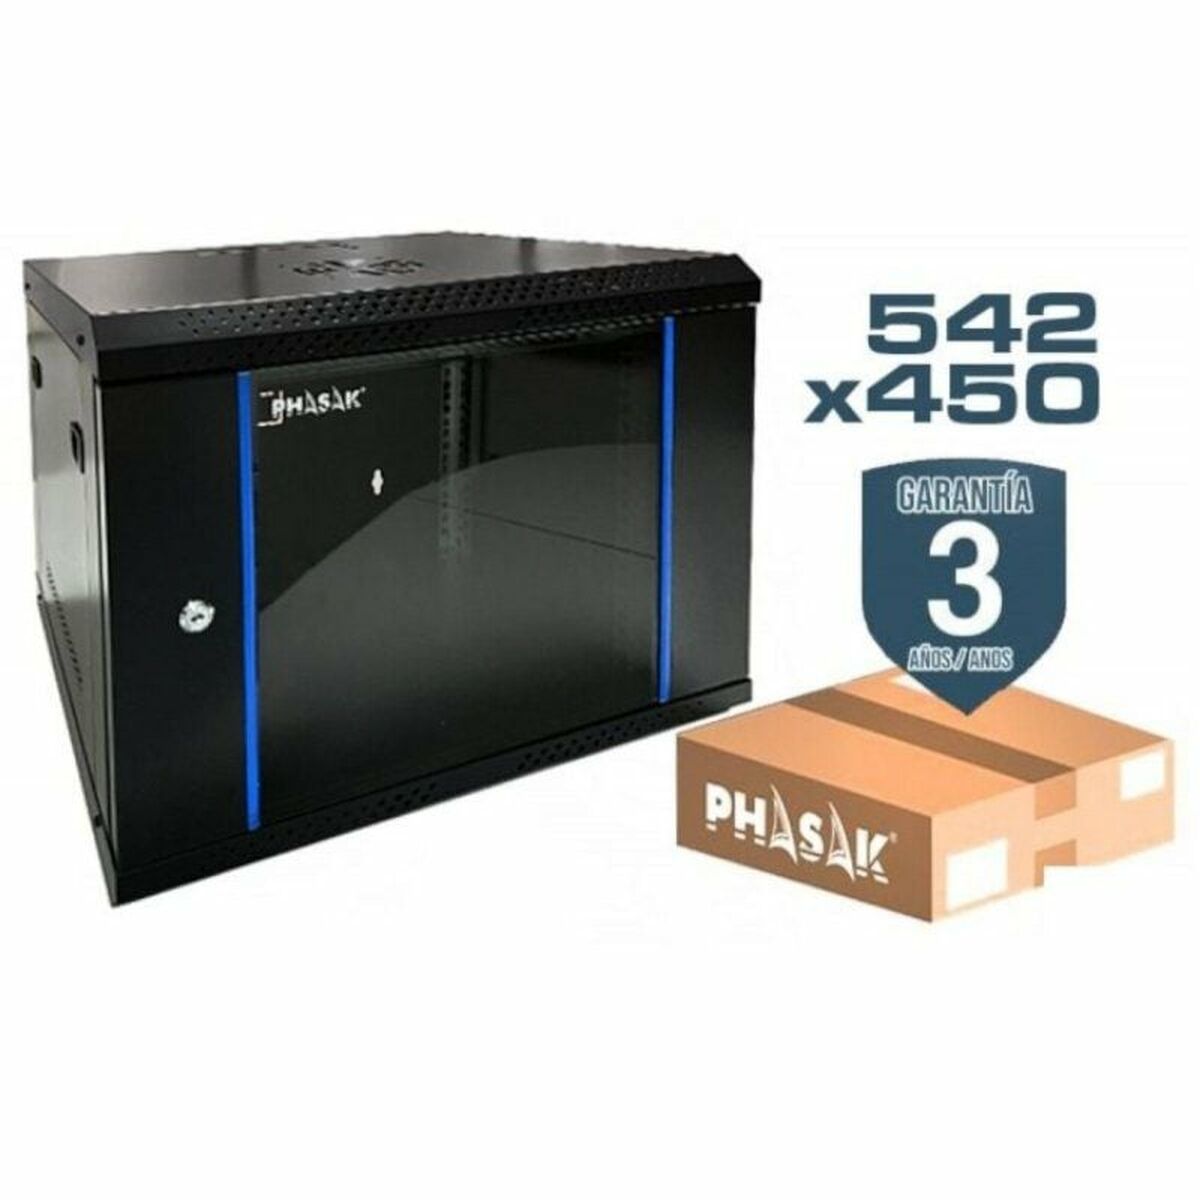 Wall-mounted Rack Cabinet Phasak PHO 2212D, Phasak, Computing, Accessories, wall-mounted-rack-cabinet-phasak-pho-2212d, Brand_Phasak, category-reference-2609, category-reference-2803, category-reference-2828, category-reference-t-19685, category-reference-t-19908, category-reference-t-21349, Condition_NEW, furniture, networks/wiring, organisation, Price_100 - 200, Teleworking, RiotNook